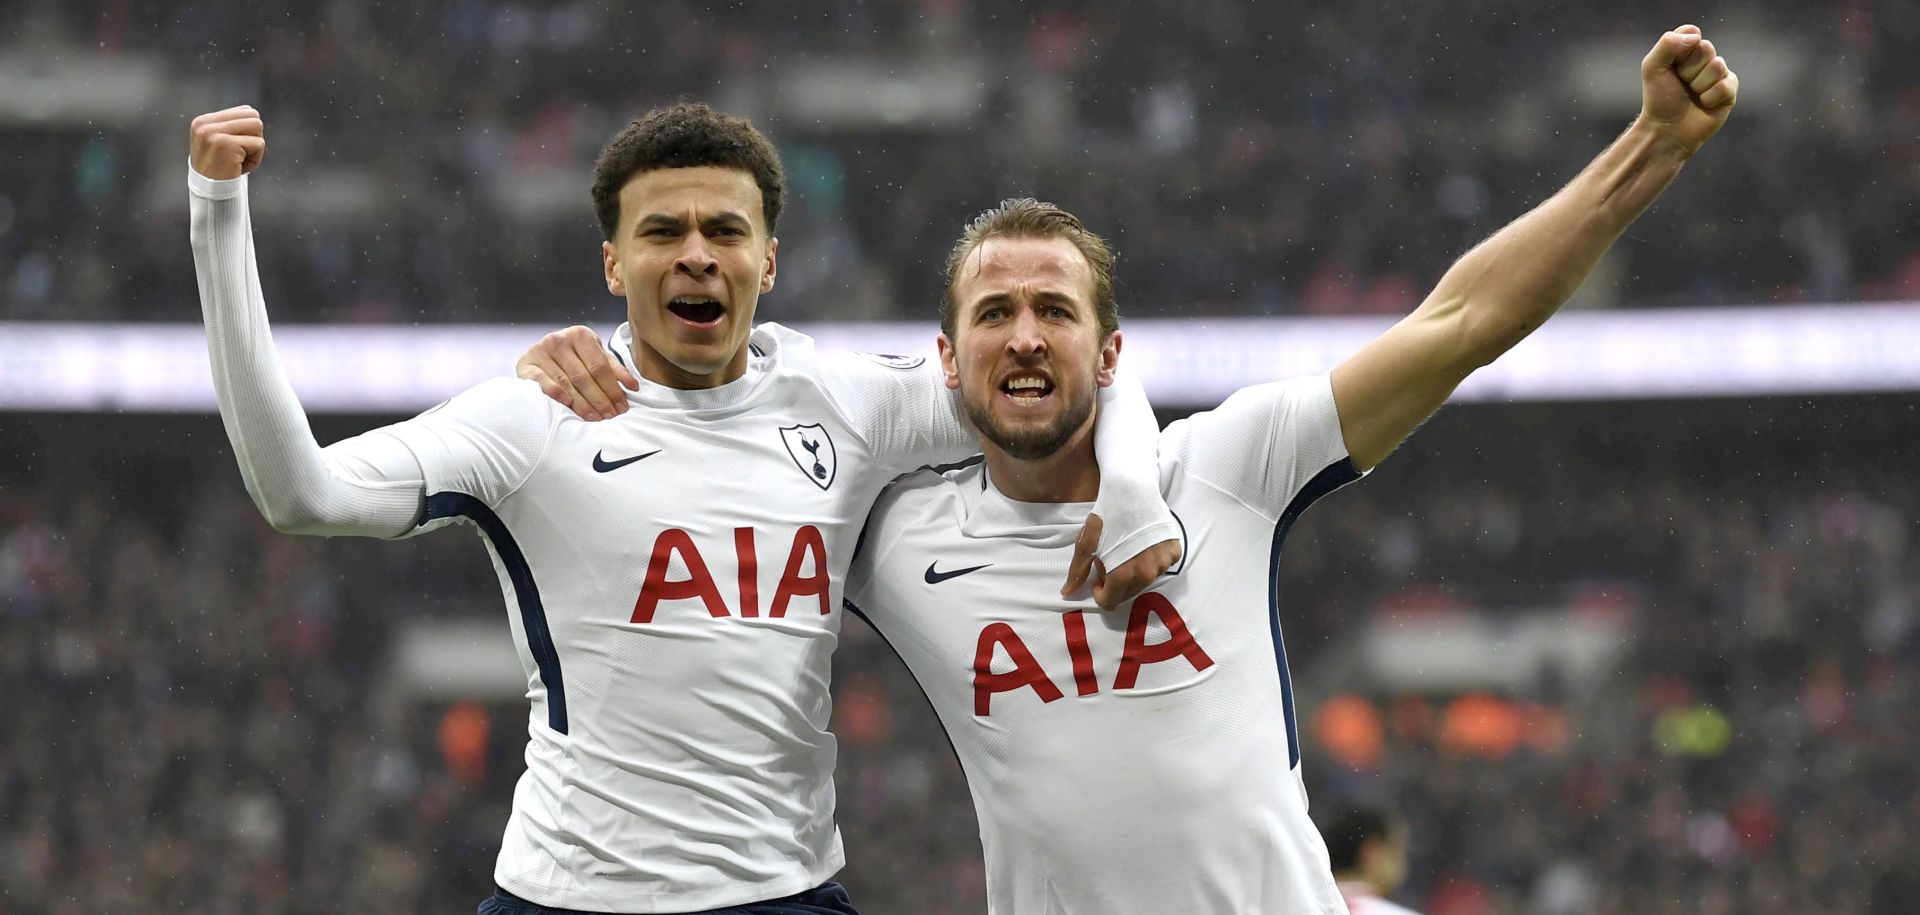 epa06511396 Tottenham Hotspur's Harry Kane (R) celebrates scoring a goal with teammate Dele Alli (L) during the English Premier League soccer match between Tottenham Hotspur and Arsenal at Wembley Stadium, London, Britain, 10 February 2018.  EPA/NEIL HALL EDITORIAL USE ONLY. No use with unauthorized audio, video, data, fixture lists, club/league logos or 'live' services. Online in-match use limited to 75 images, no video emulation. No use in betting, games or single club/league/player publications.